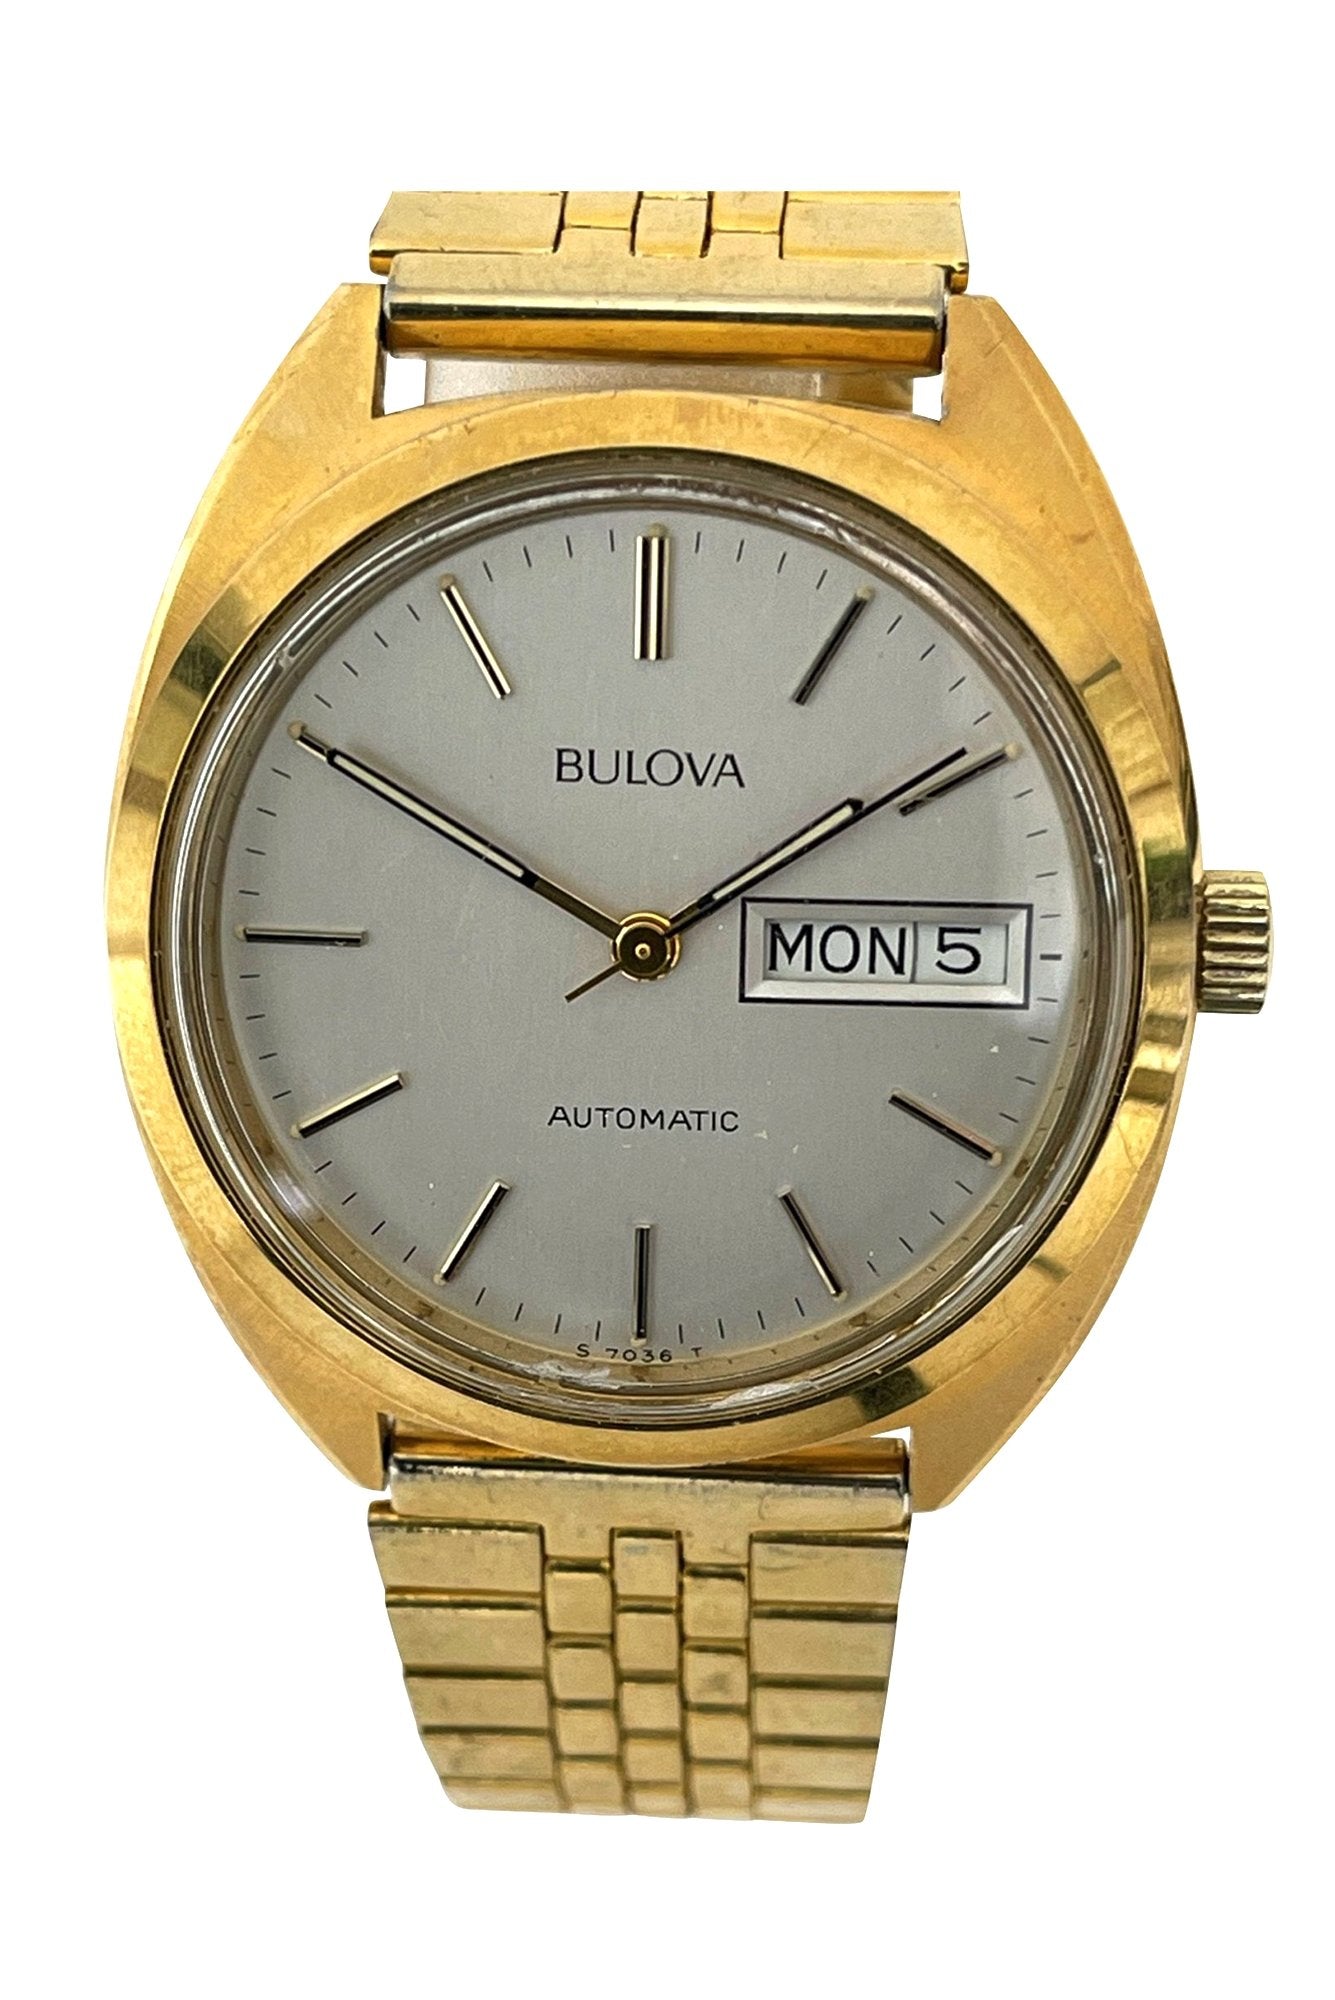 Bulova Commemorative Automatic - Counting Time Watch Purveyors